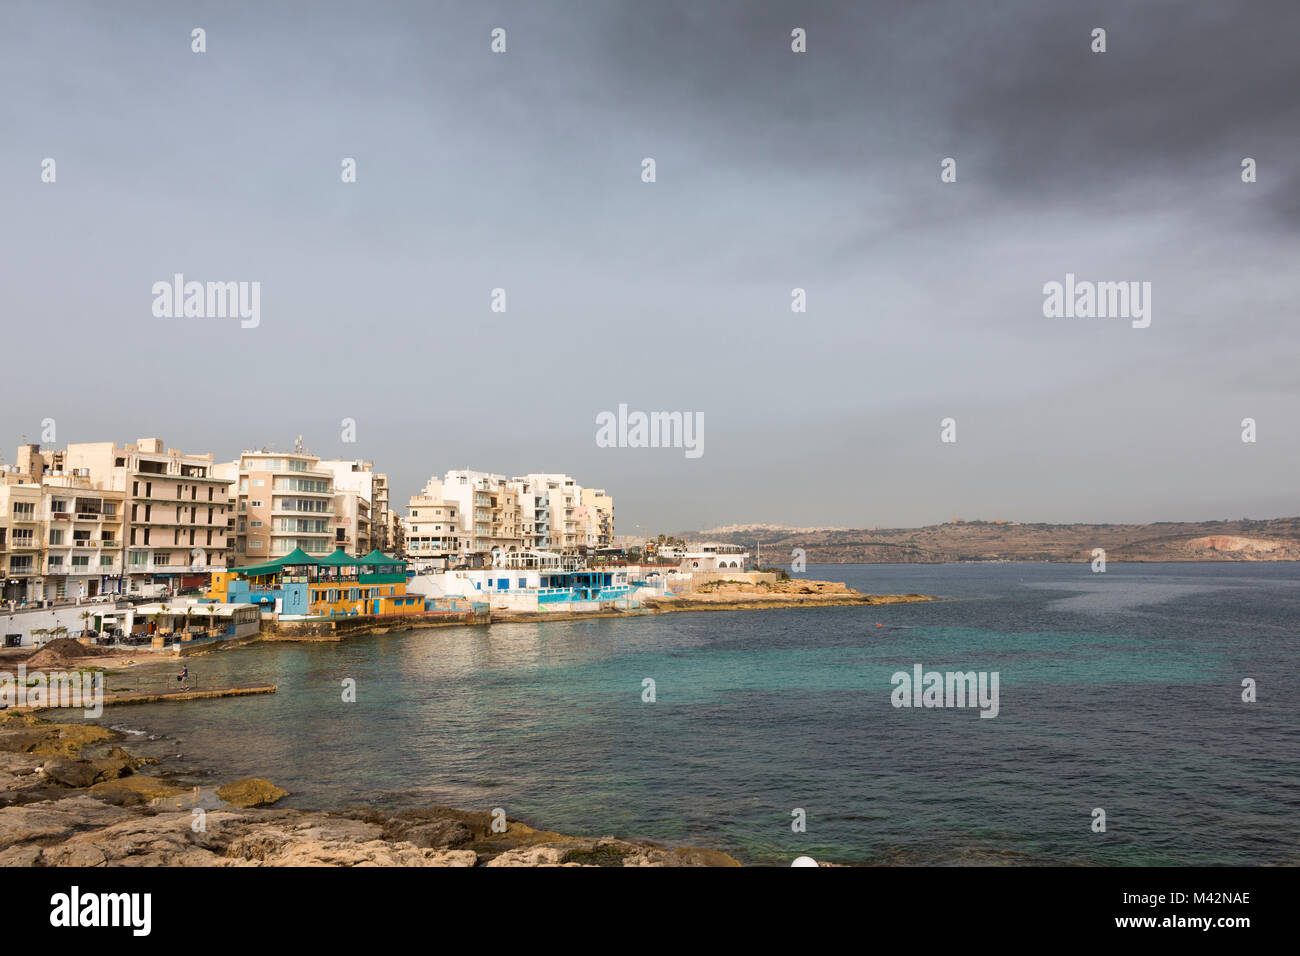 An image of St. Paul's bay and the surrounding buildings, Qawra, Malta taken on a Spring day. Stock Photo